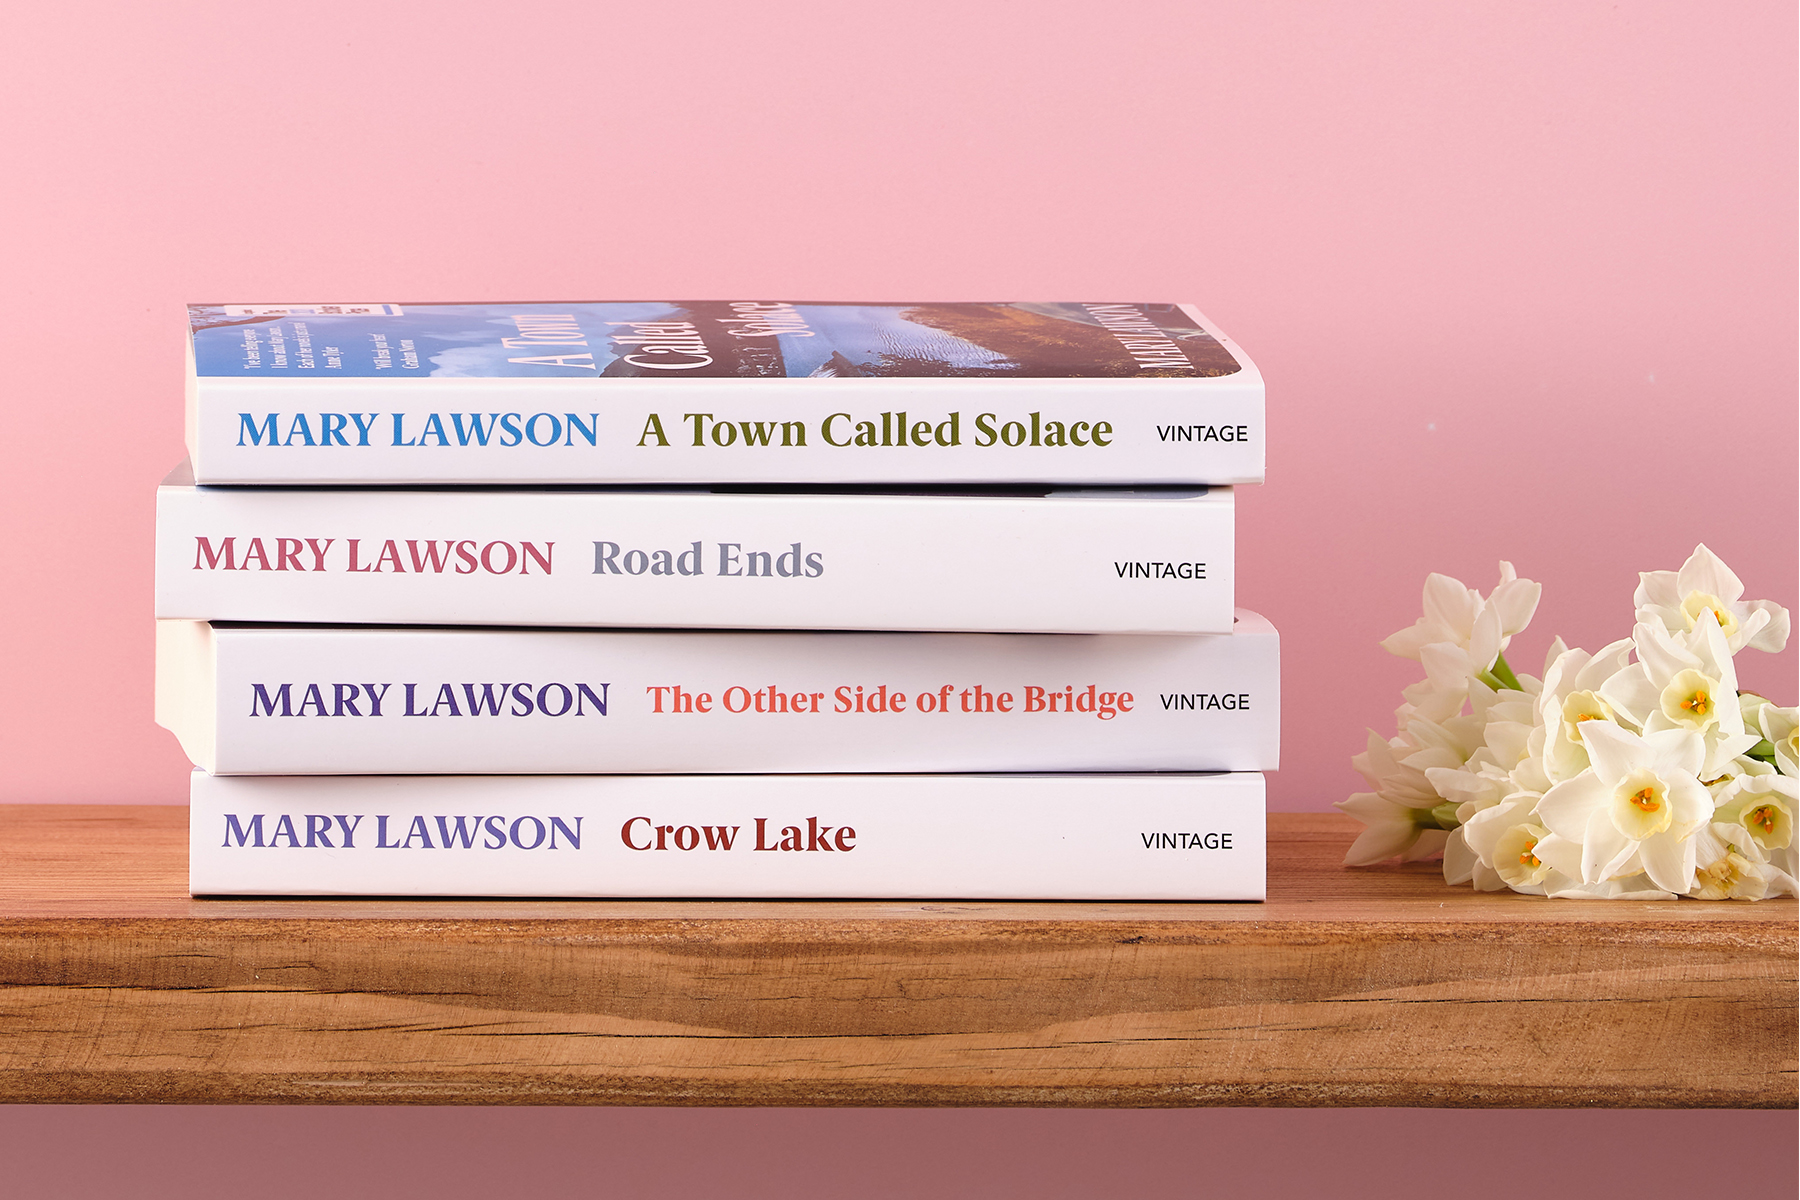 Mary Lawson's books stacked against a pink background with a flower to the right